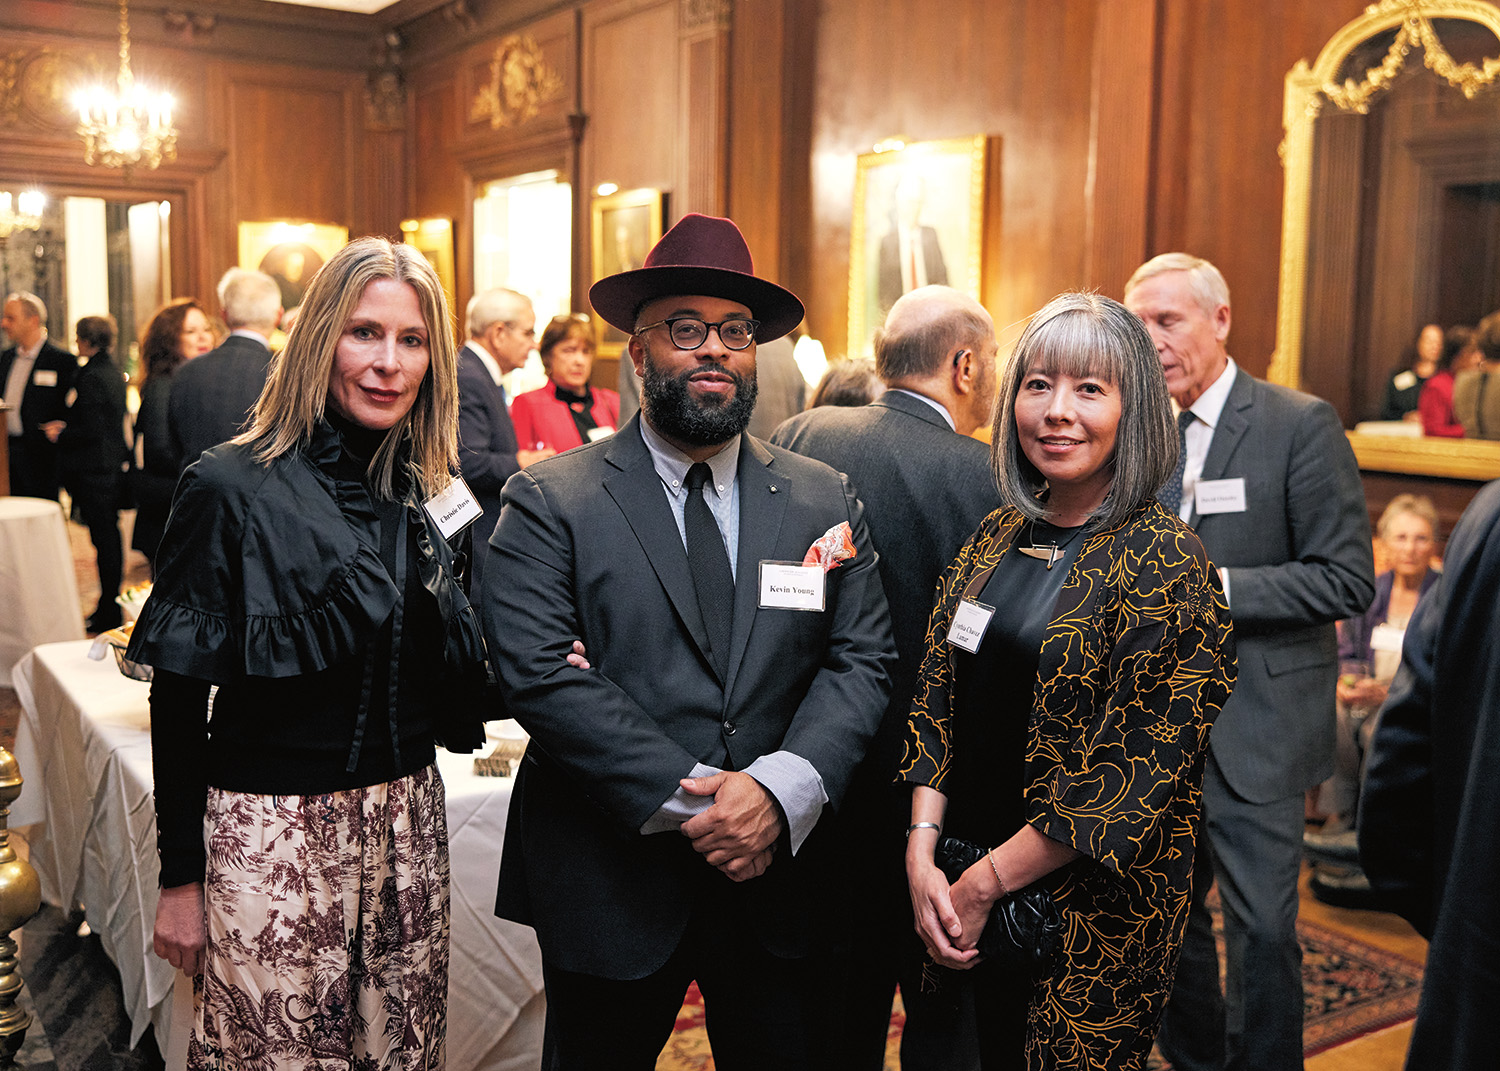 Christine David, Kevin Young, and Cynthia Chavez Lamar face the viewer in a group shot. They smile and are dressed in cocktail attire. Behind them is an event room filled with other attendees at the launch of the final report of the Commission on Accelerating Climate Action.